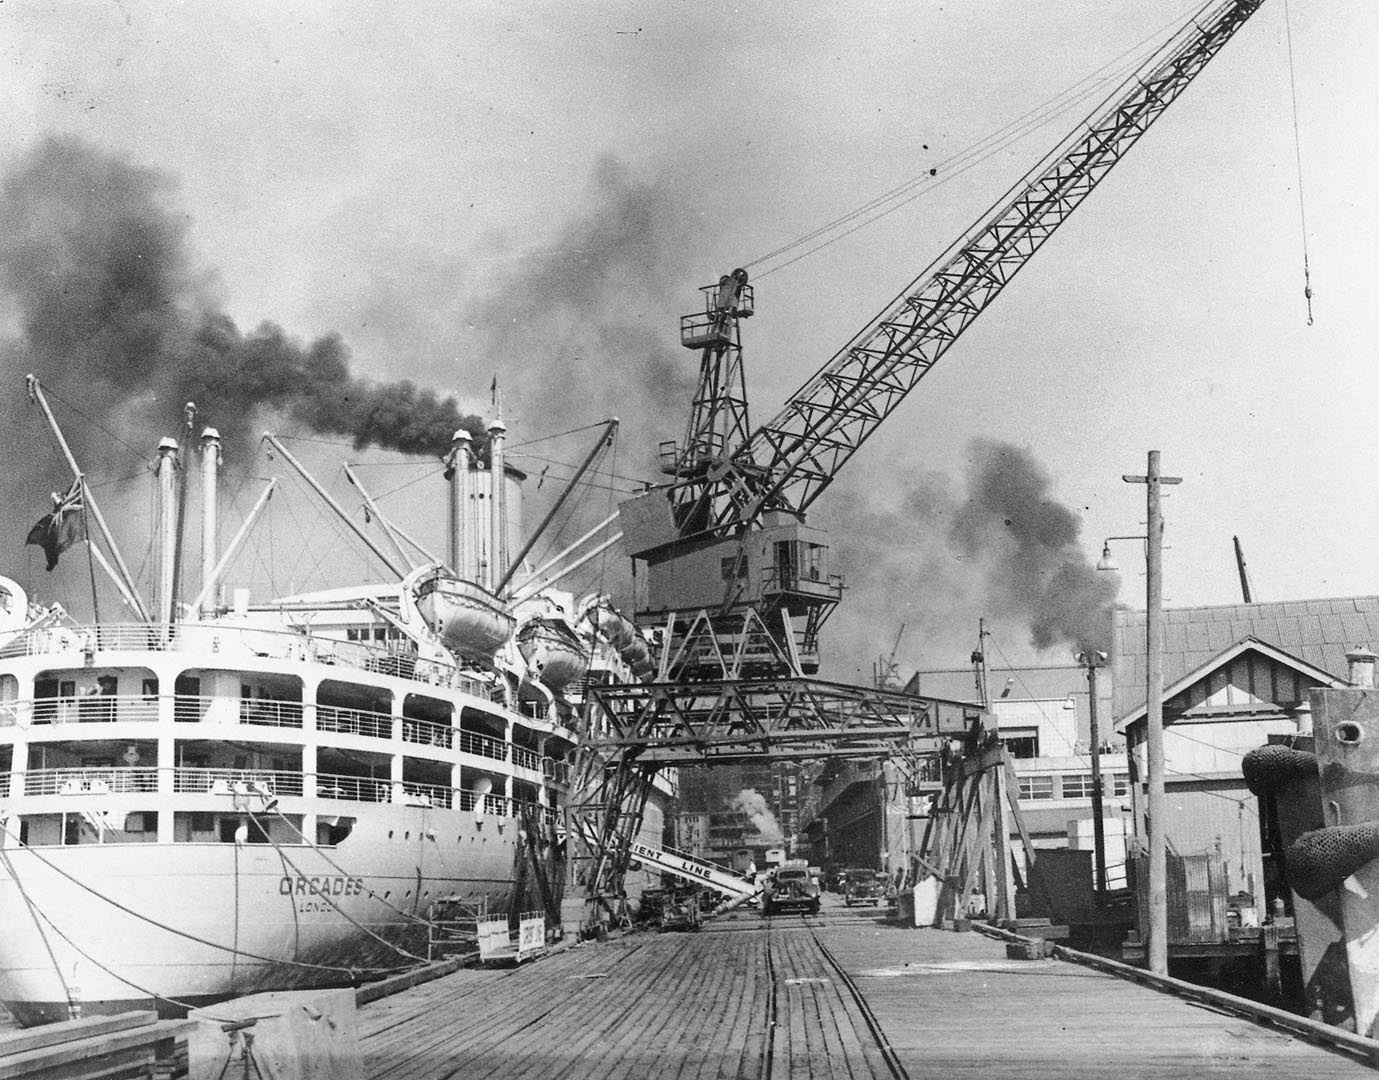 Docked ship at Darling Island, 1950 (Photograph: State Library of NSW)